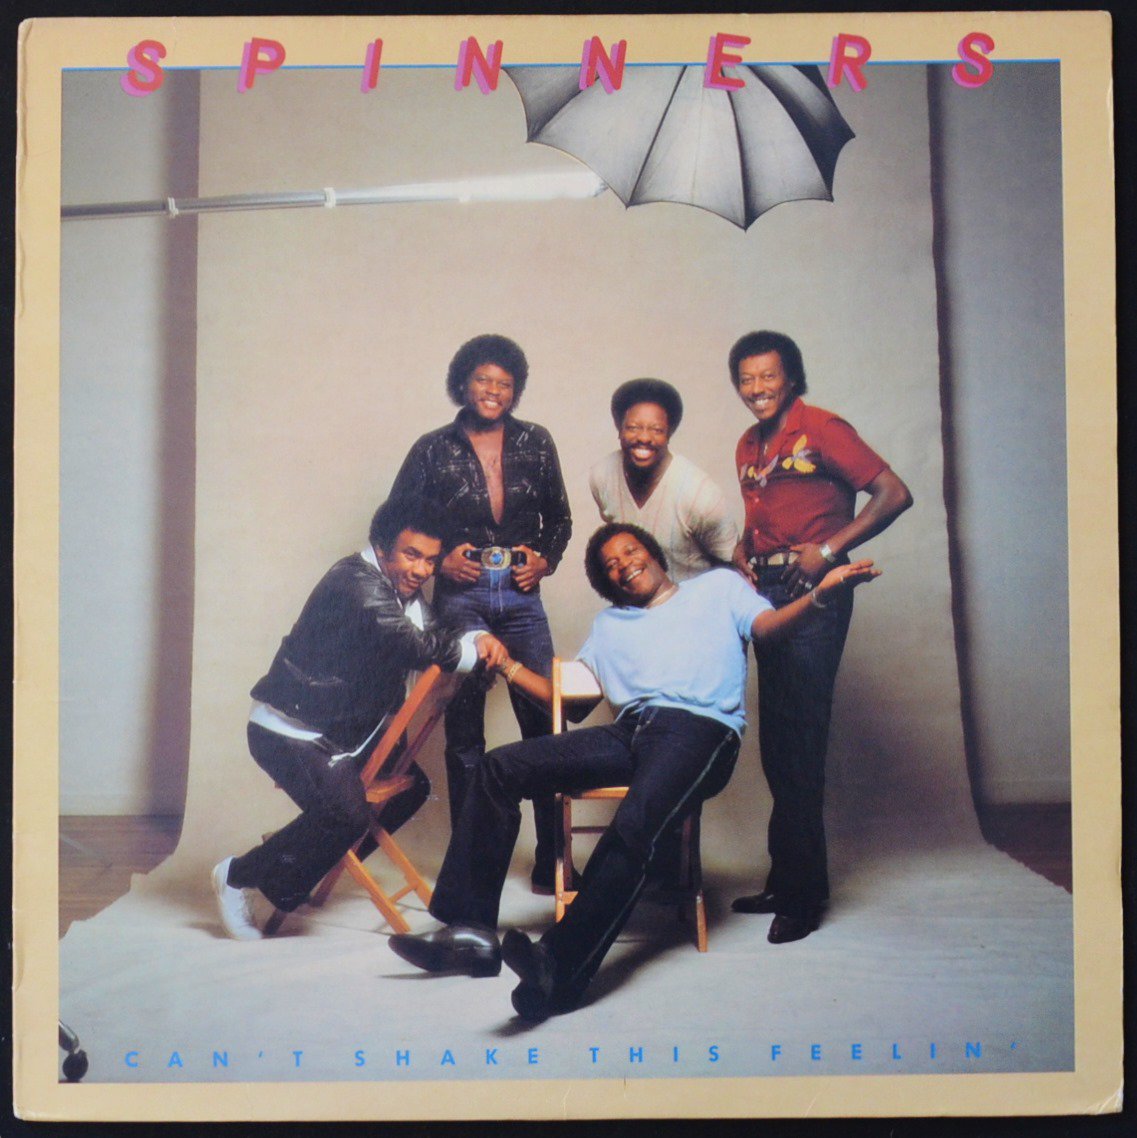 SPINNERS / CAN'T SHAKE THIS FEELIN' (LP)